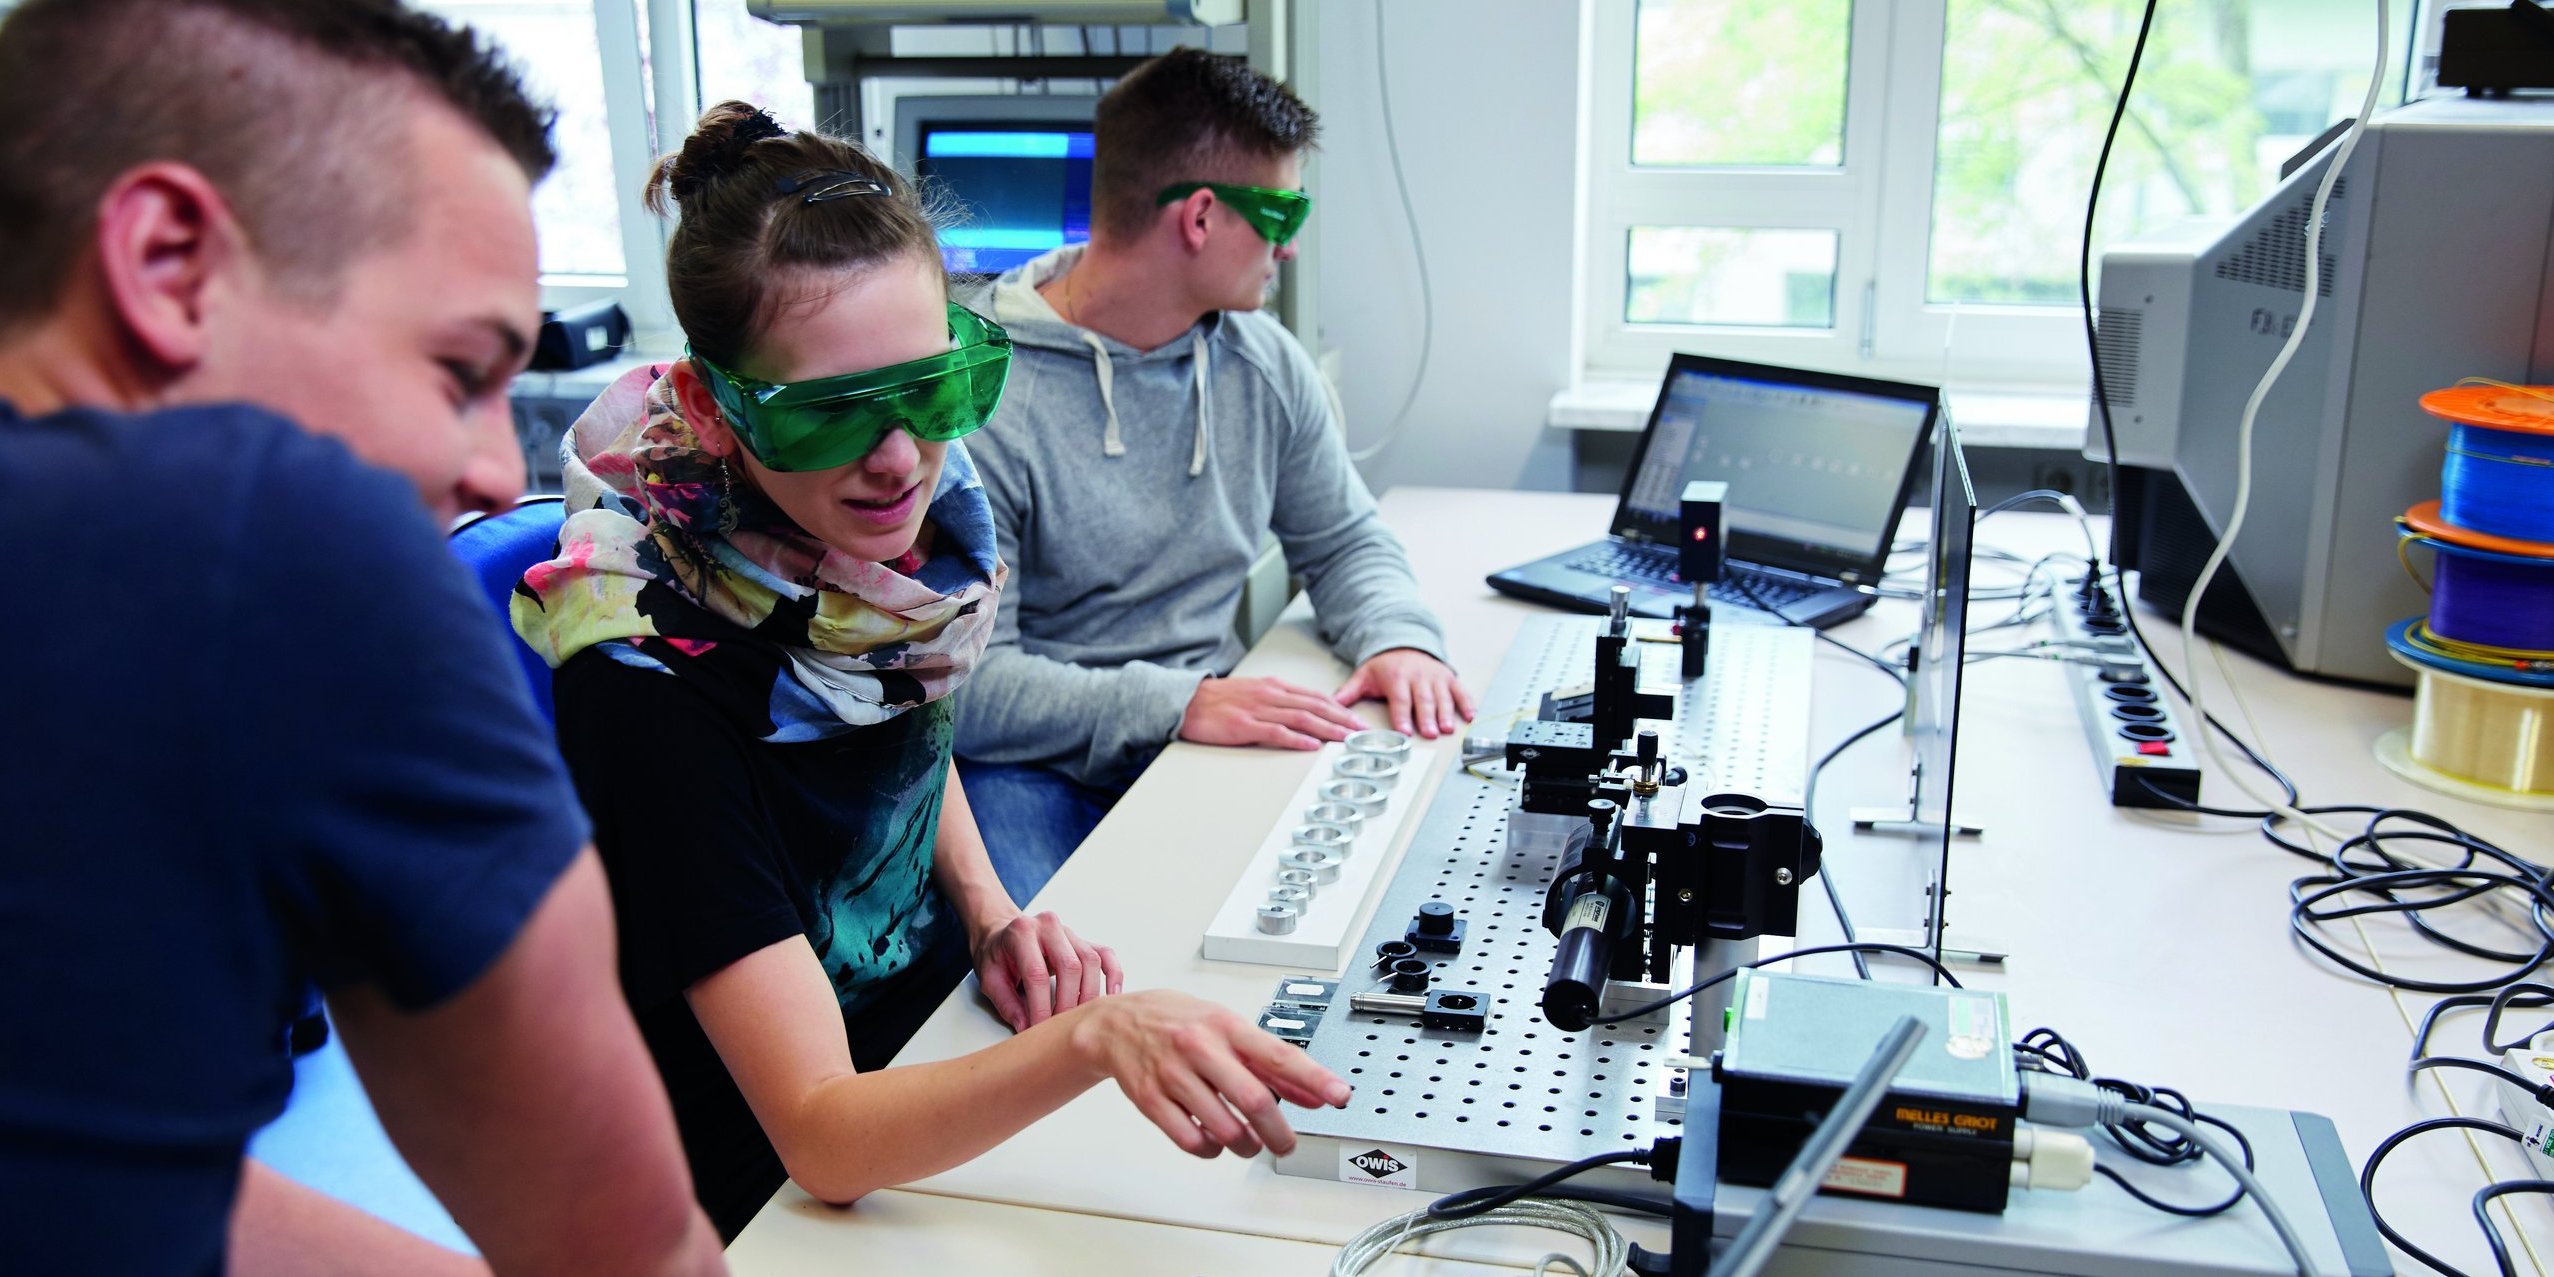 People, some with protective goggles, in front of technical equipment